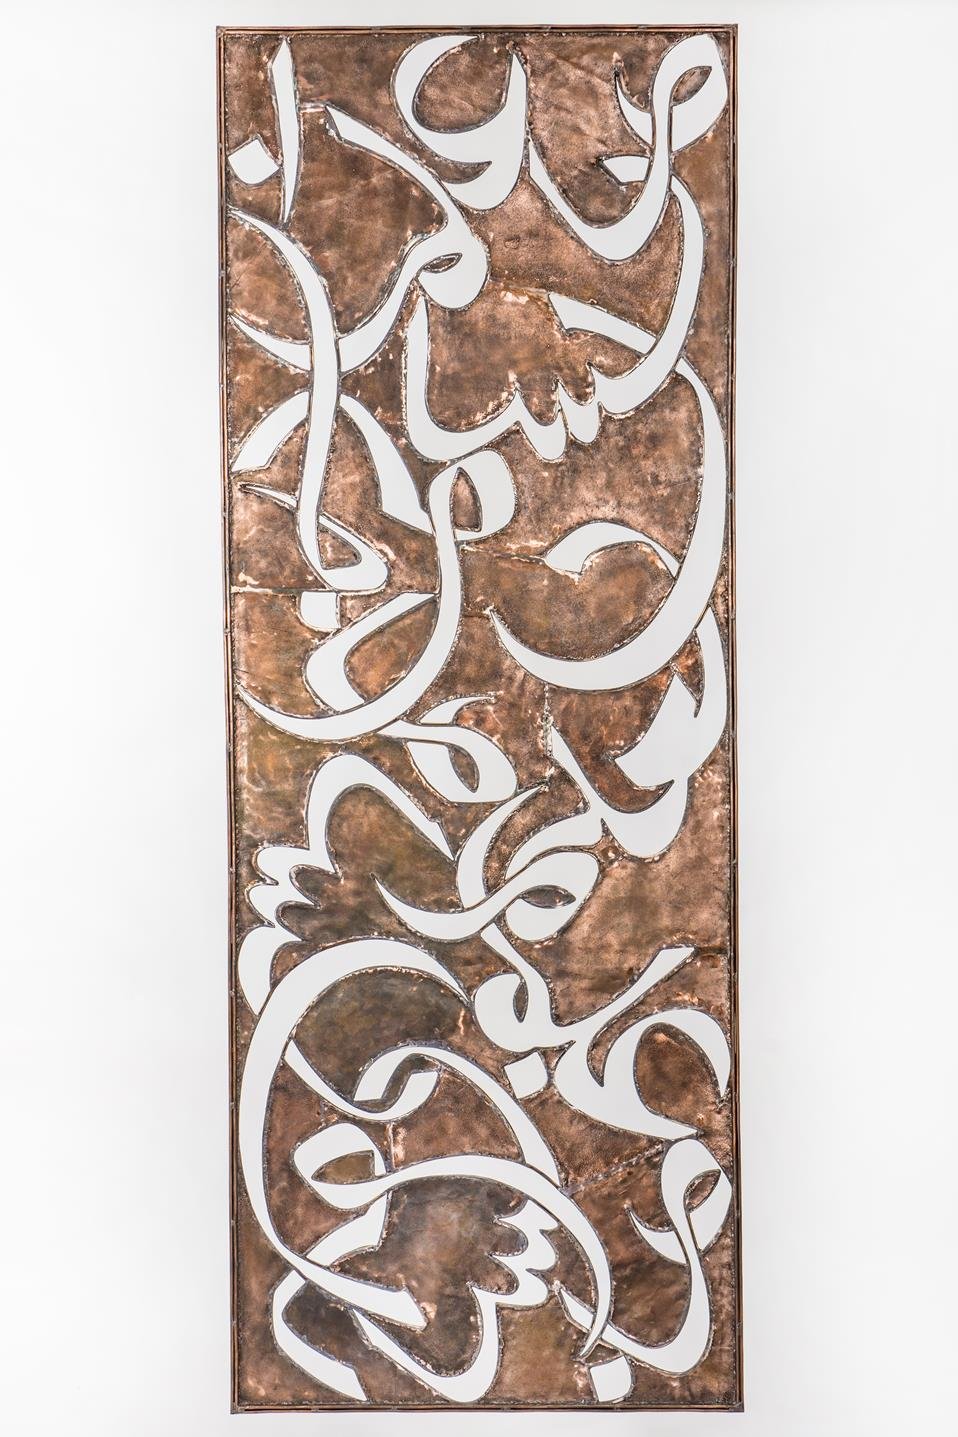 Perforated Scroll I, 2018 | Copper, 26x25x2in